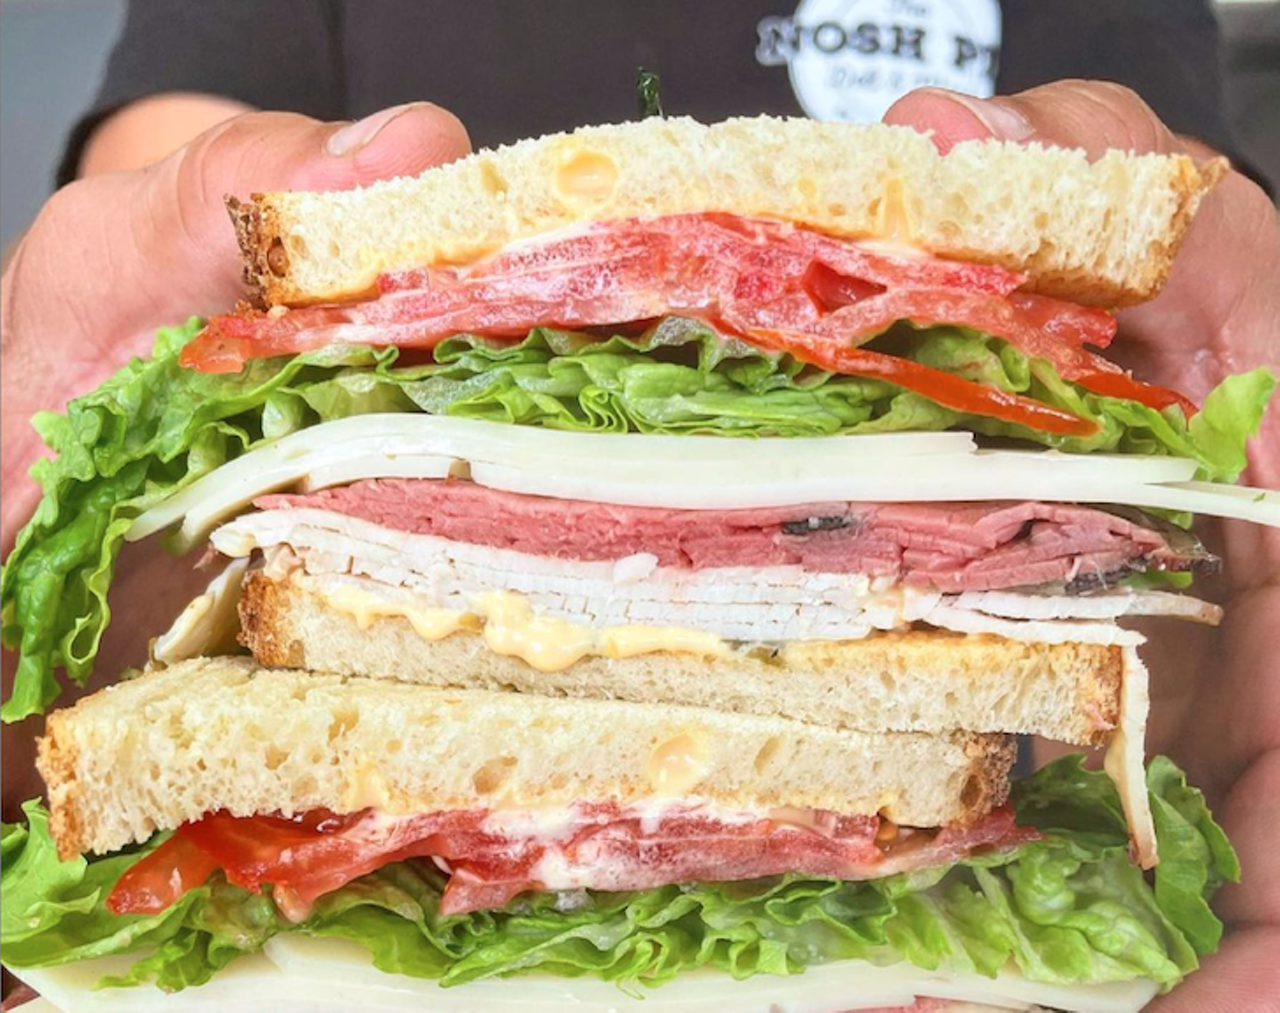 The Nosh Pit
4040 Park St. N, St. Petersburg
The Nosh Pit, a sister concept to The Wheelhouse in downtown St. Pete, opened in April. The New York-style deli serves Jewish classics like knishes, lox and latkes.
Photo via The Nosh Pit/Instagram